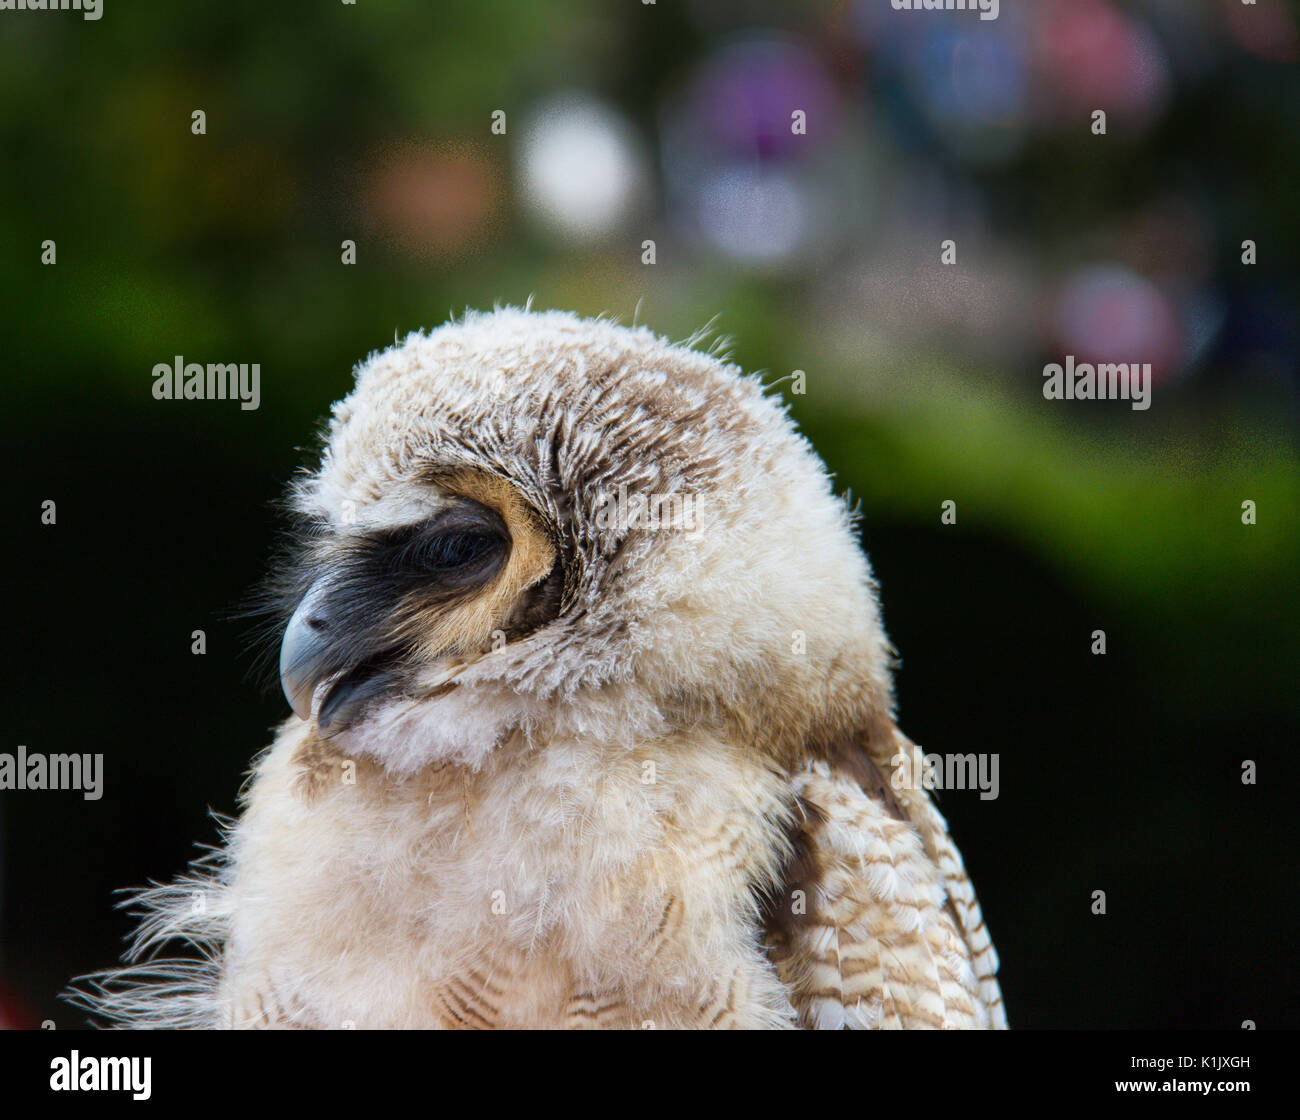 Owl bird of prey against blurred background close-up Stock Photo